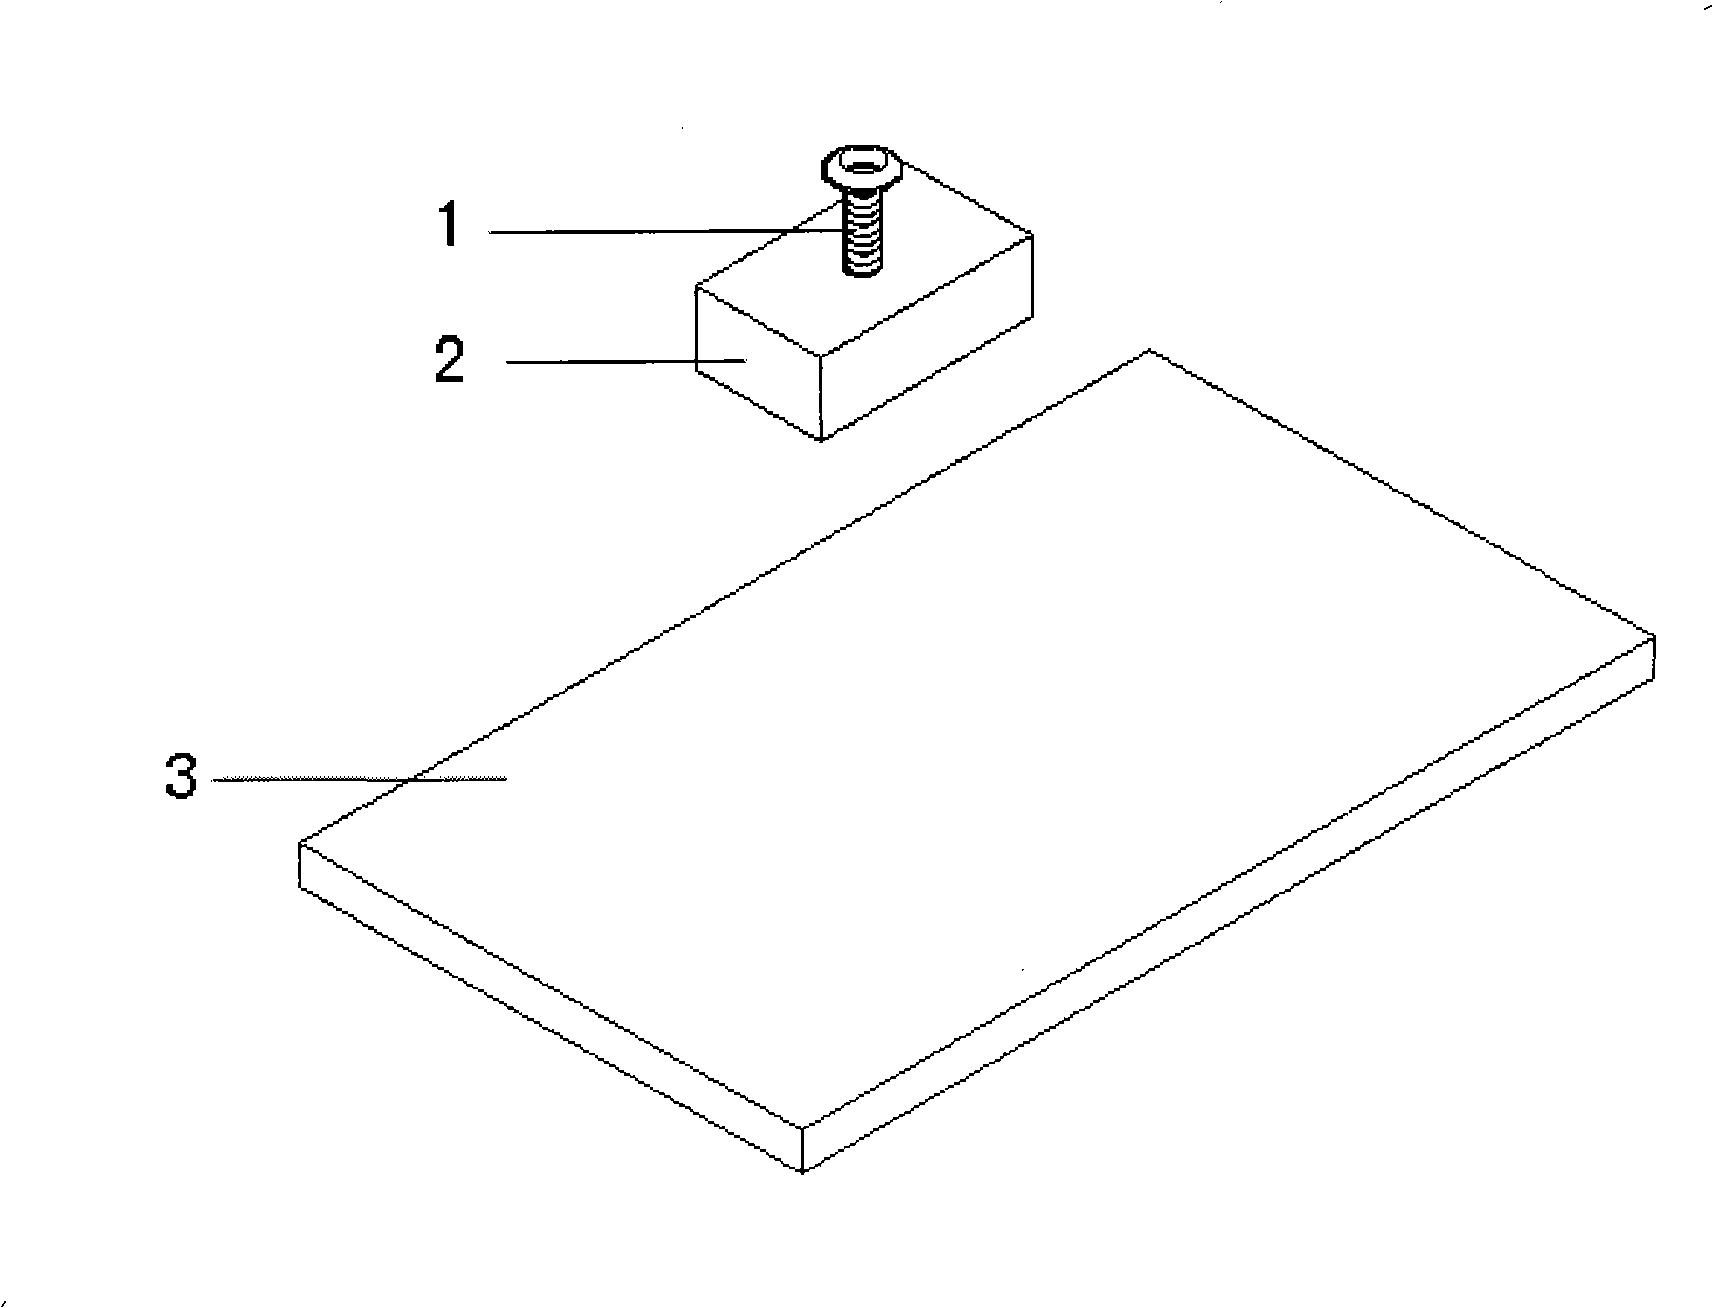 Method for determining wooden furniture lacquerfilm coatings adhesive force